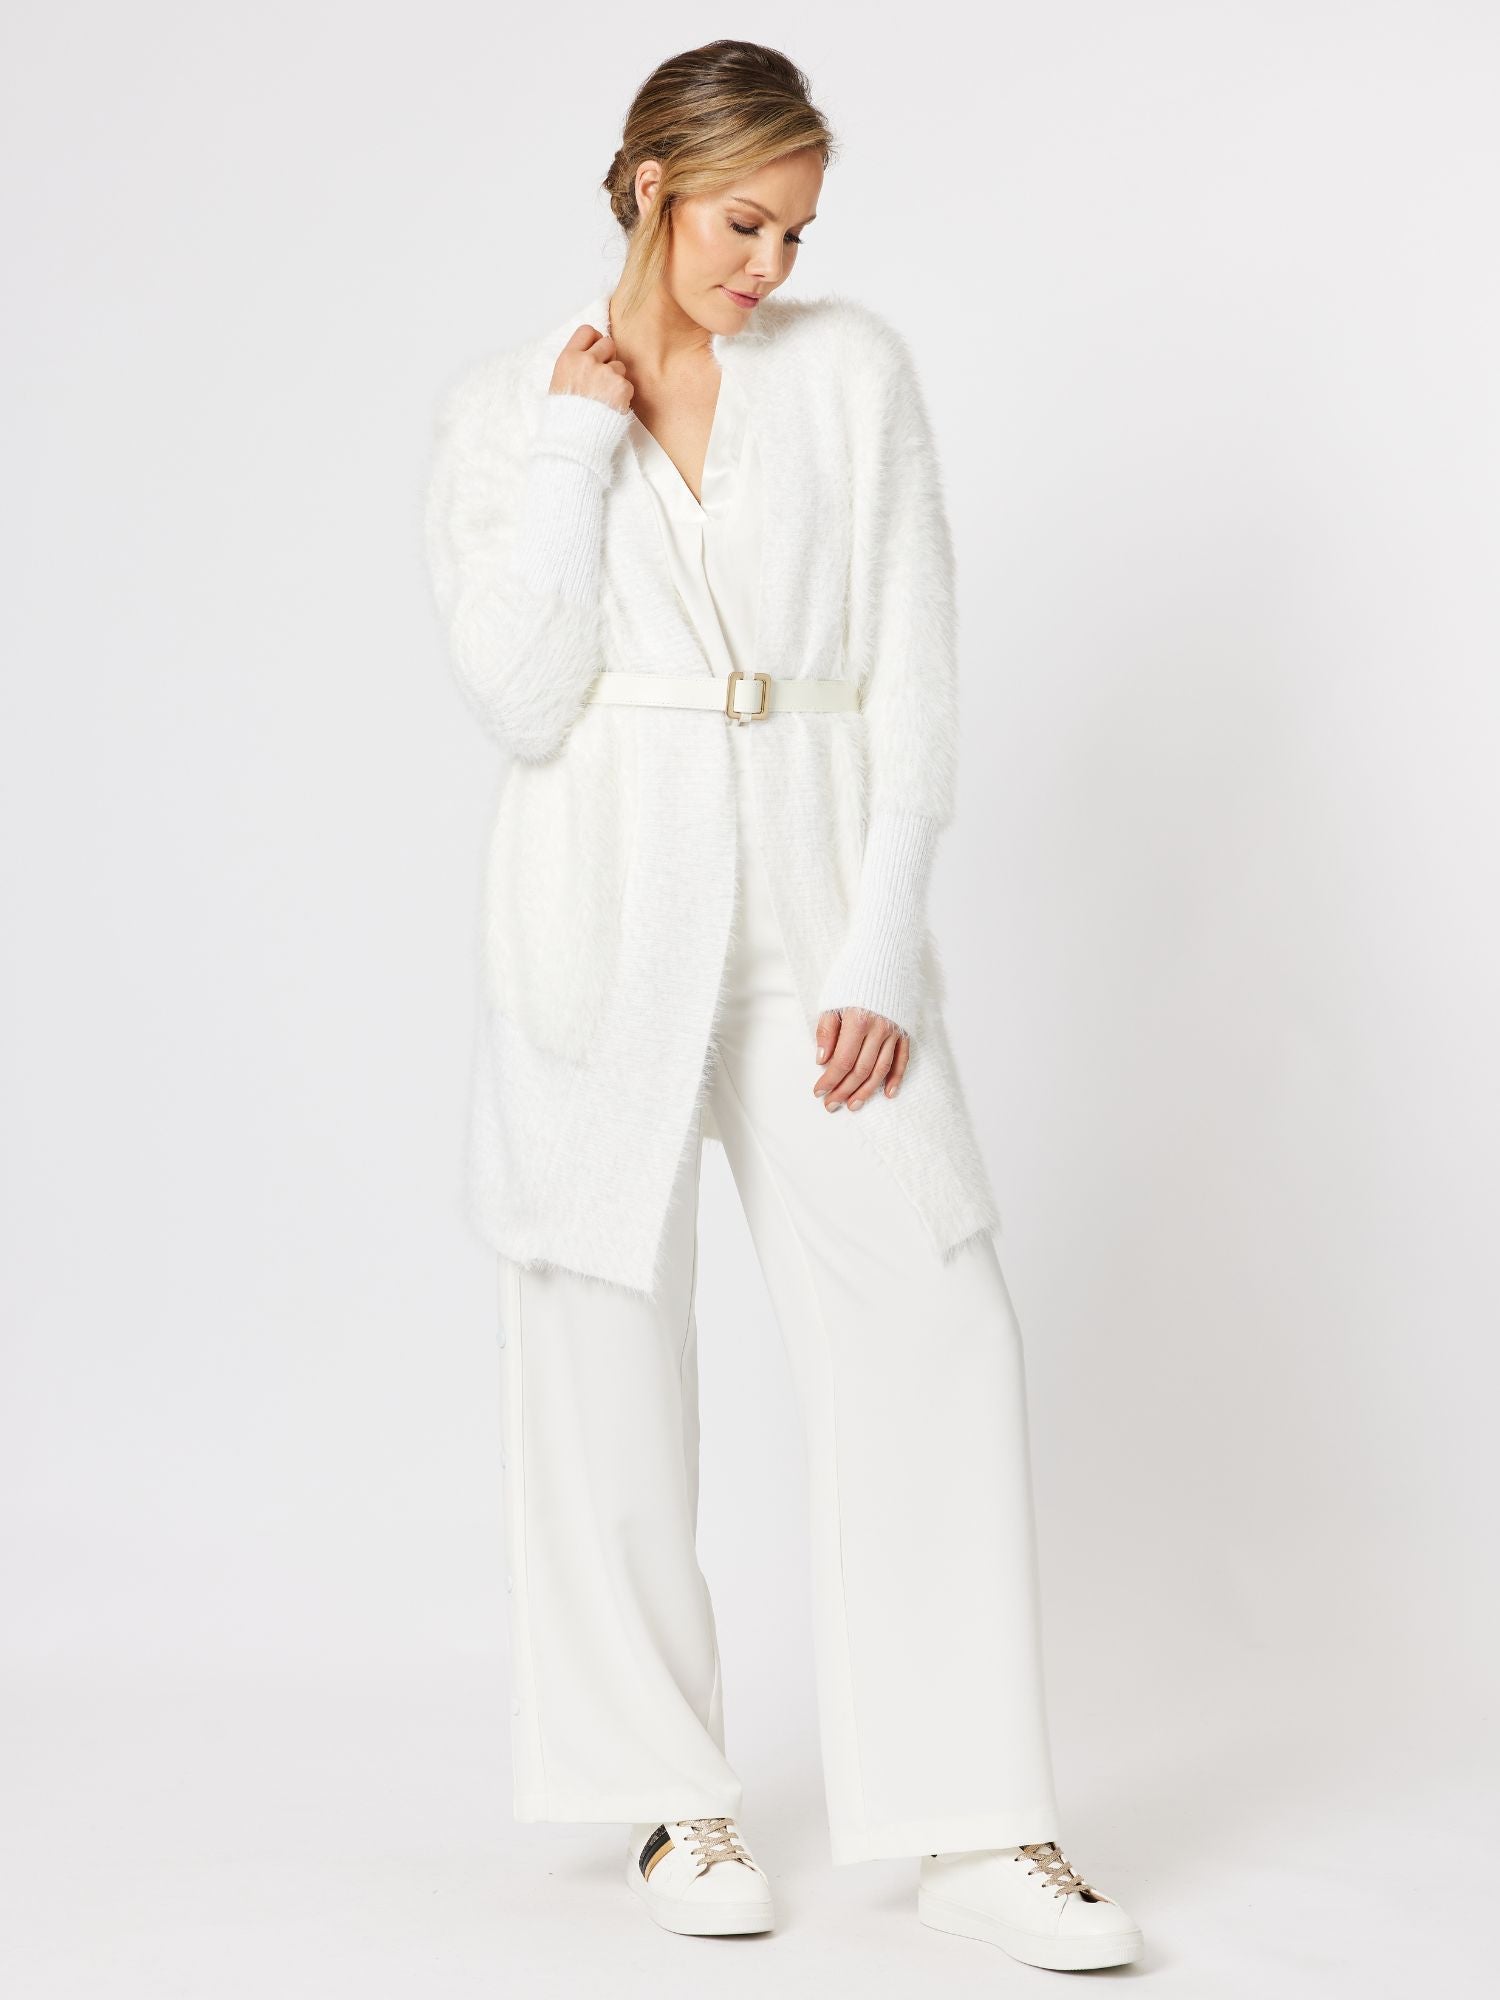 Feather Knit Top 2 Way Cardigan - Winter White